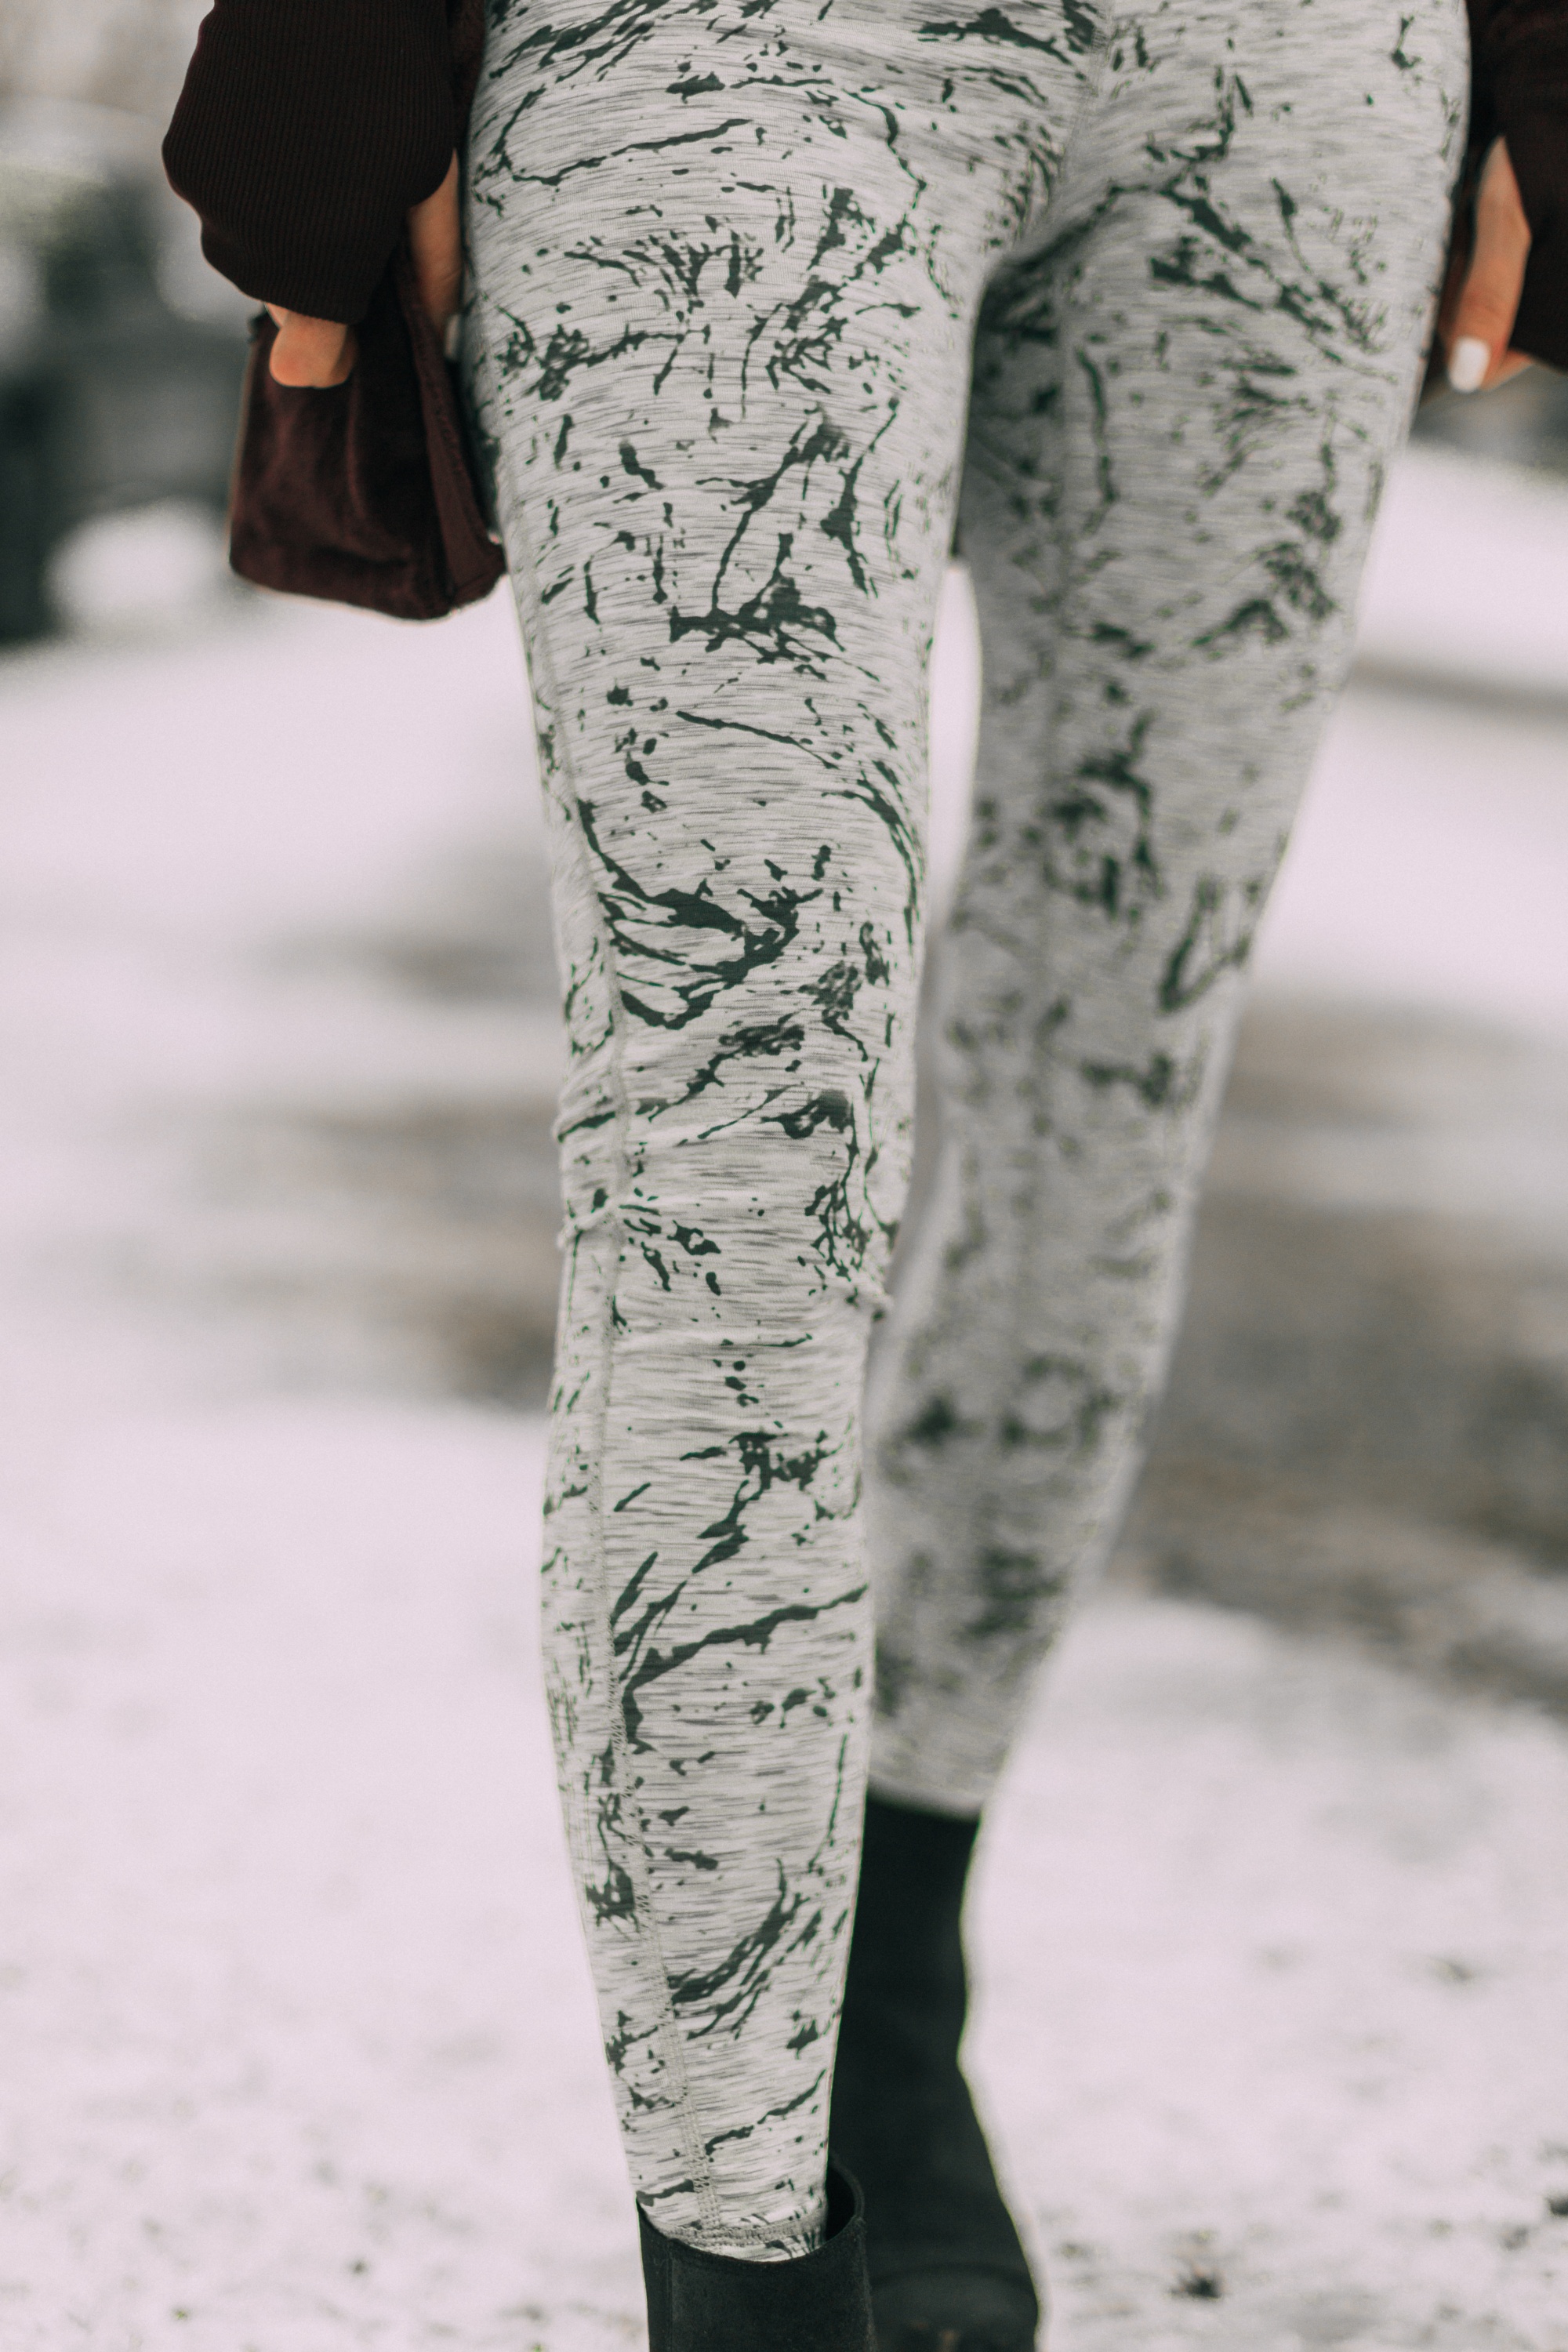 Reversible leggings from Jockey worn by fashion blogger Erin Busbee of BusbeeStyle.com in Telluride, CO